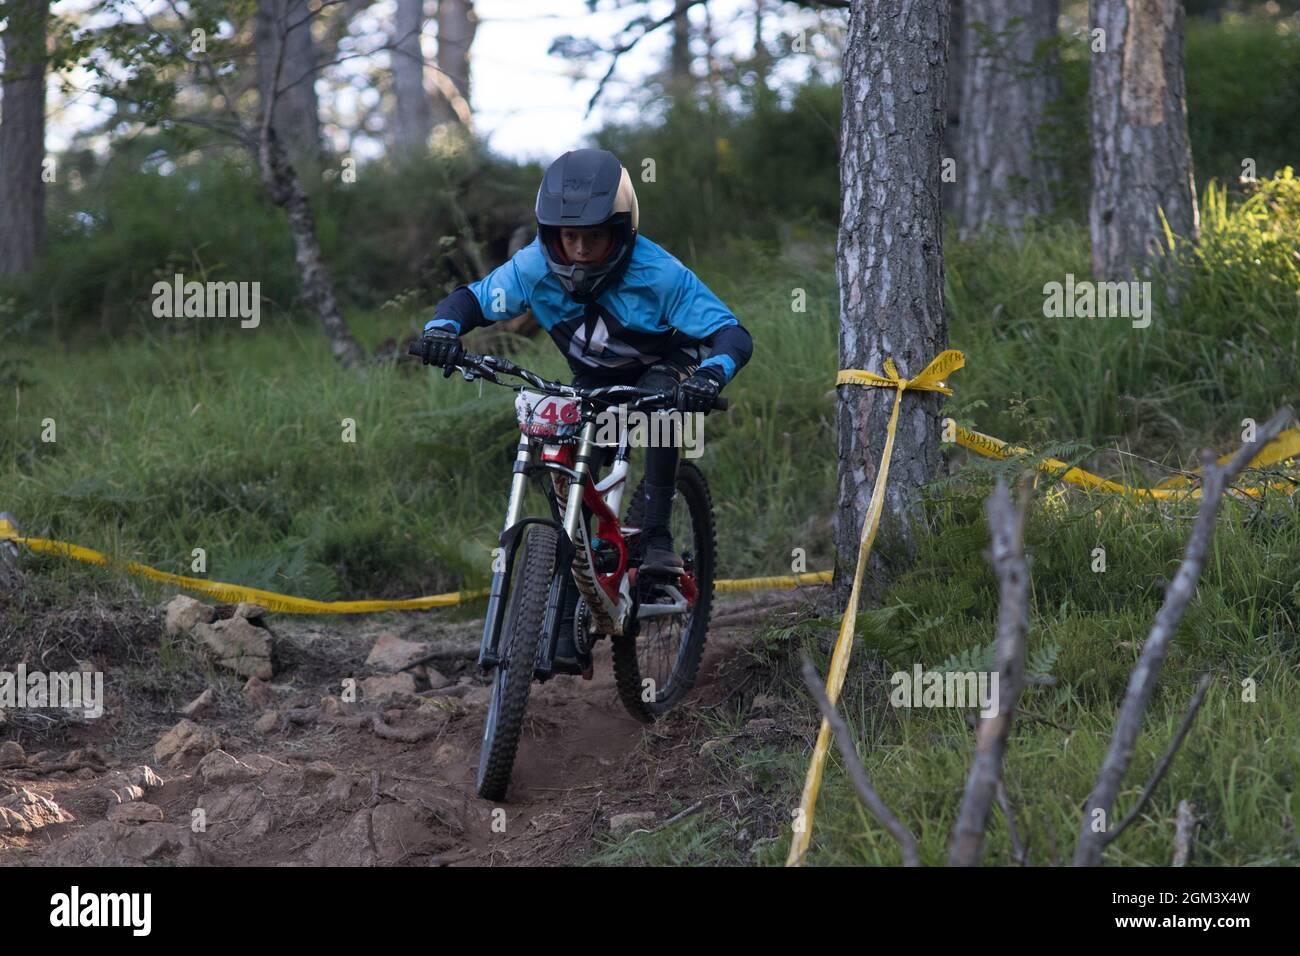 A young competitive fast downhill mountain biker driving in woods Stock Photo